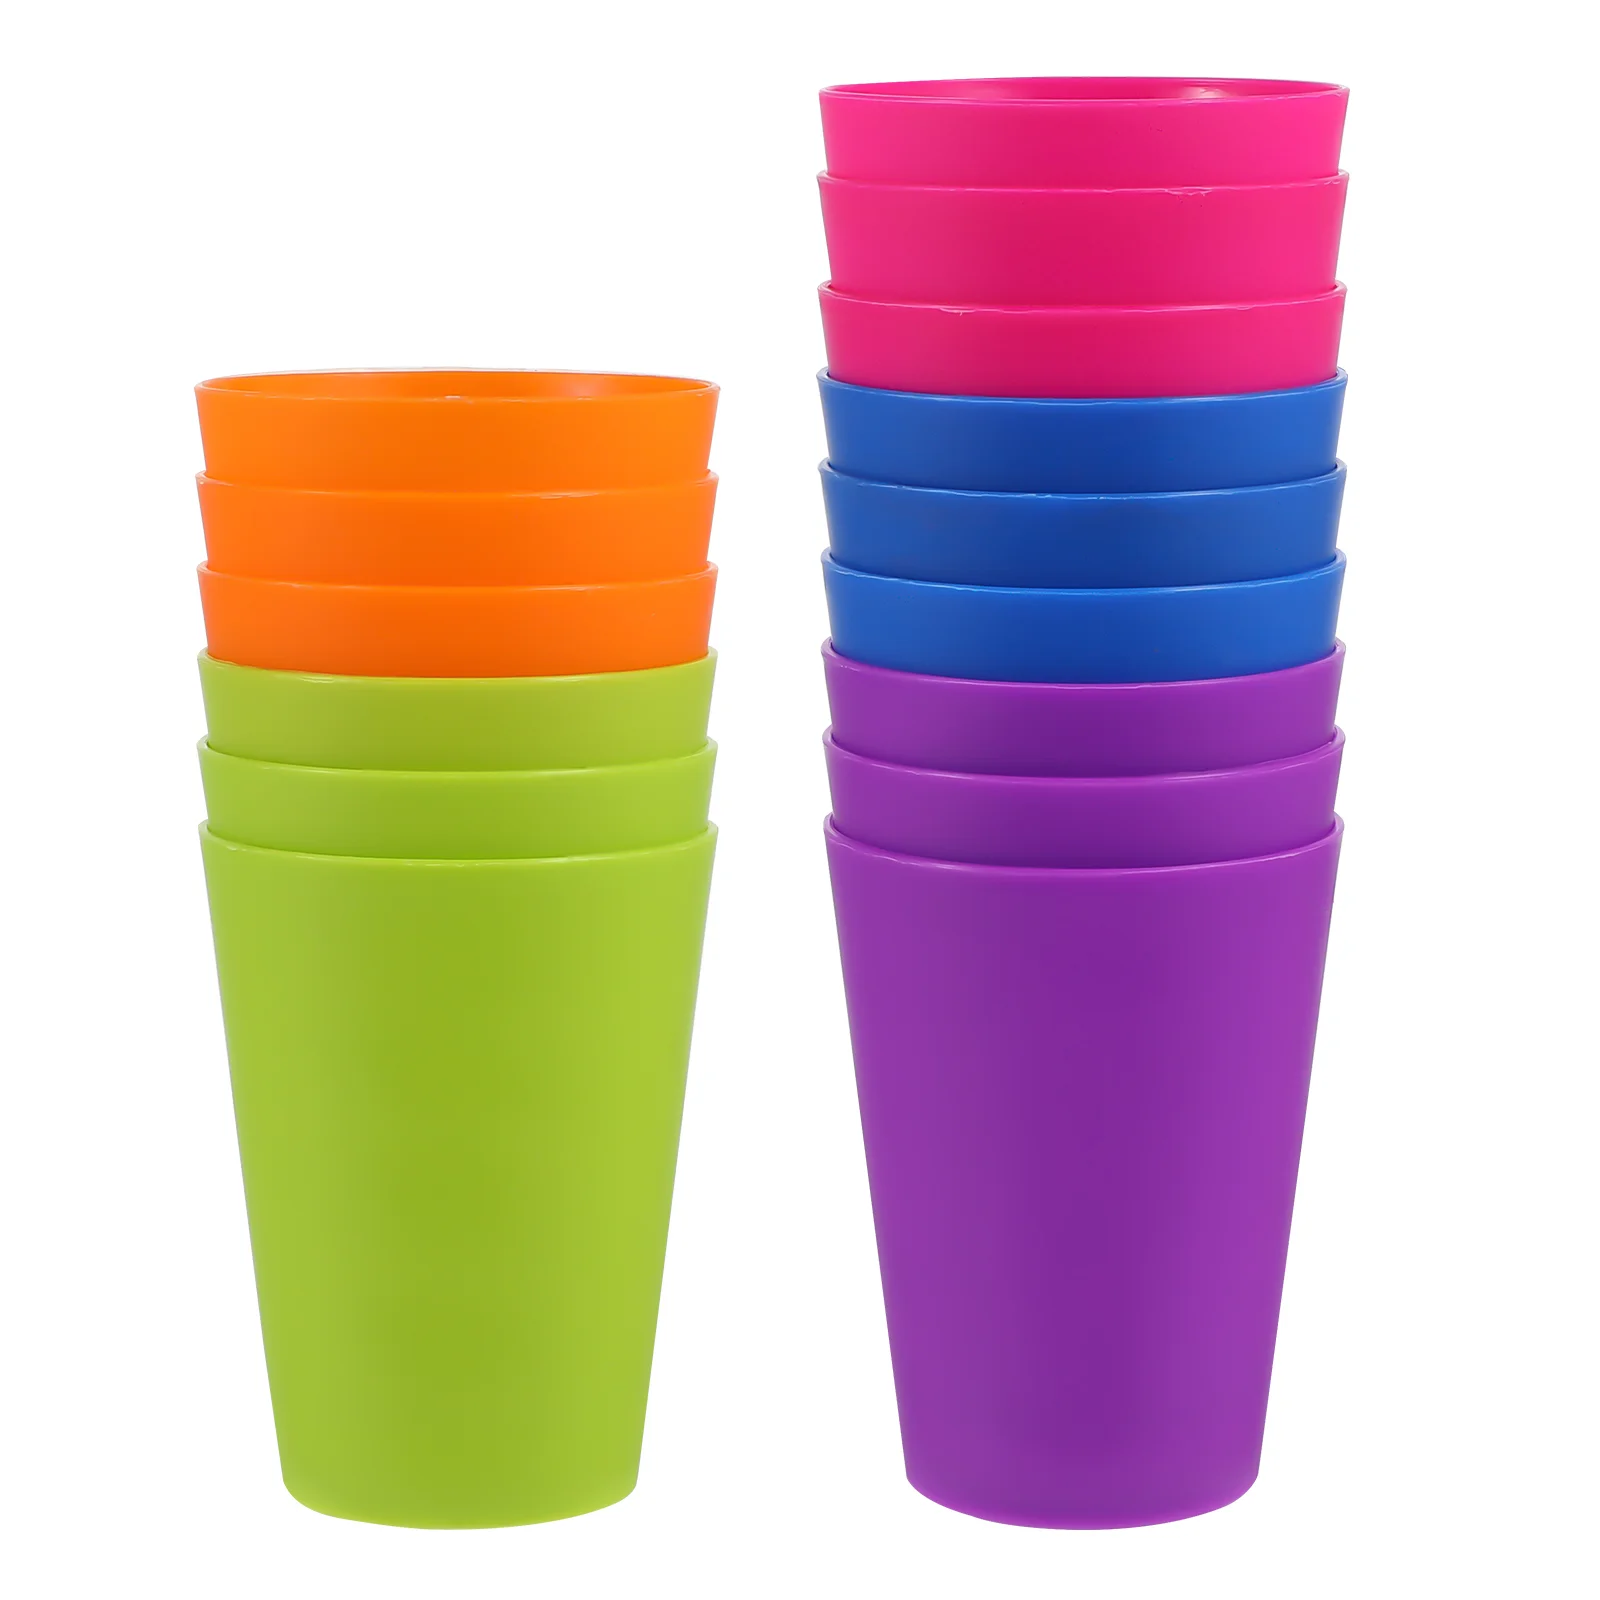 

TOYMYTOY 15pcs Colorful Plastic Cups Home Beverage Drinking Cups Reusable Holiday Party Tableware and Party Supplies 101-200ml